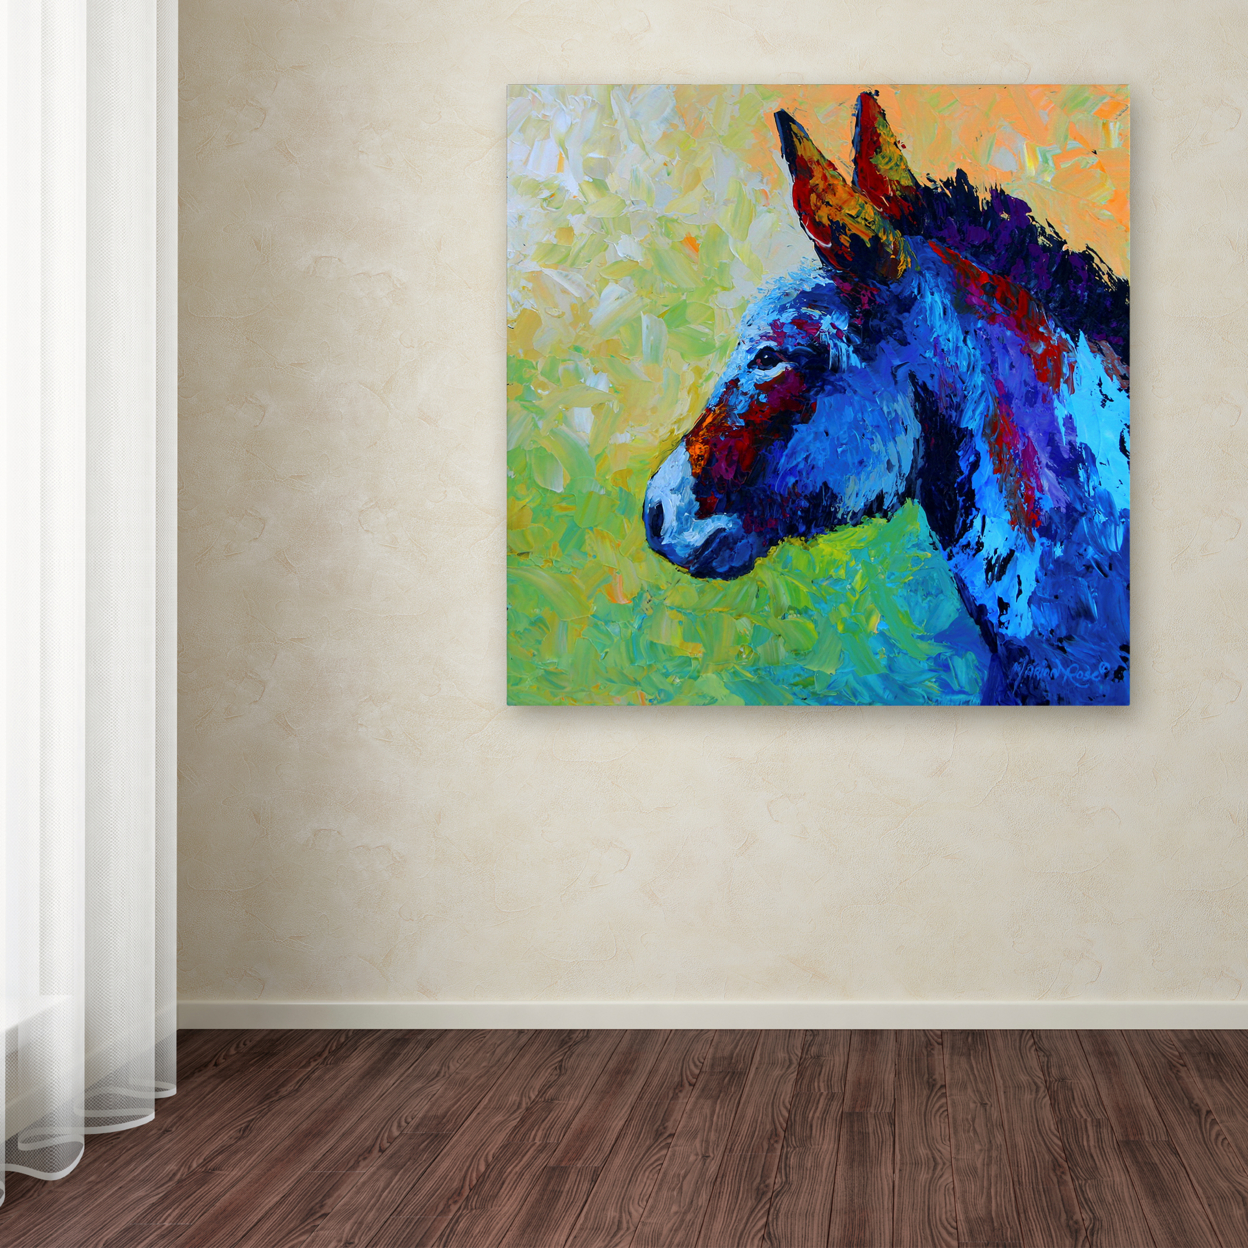 Marion Rose 'Burro' Ready To Hang Canvas Art 24 X 24 Inches Made In USA